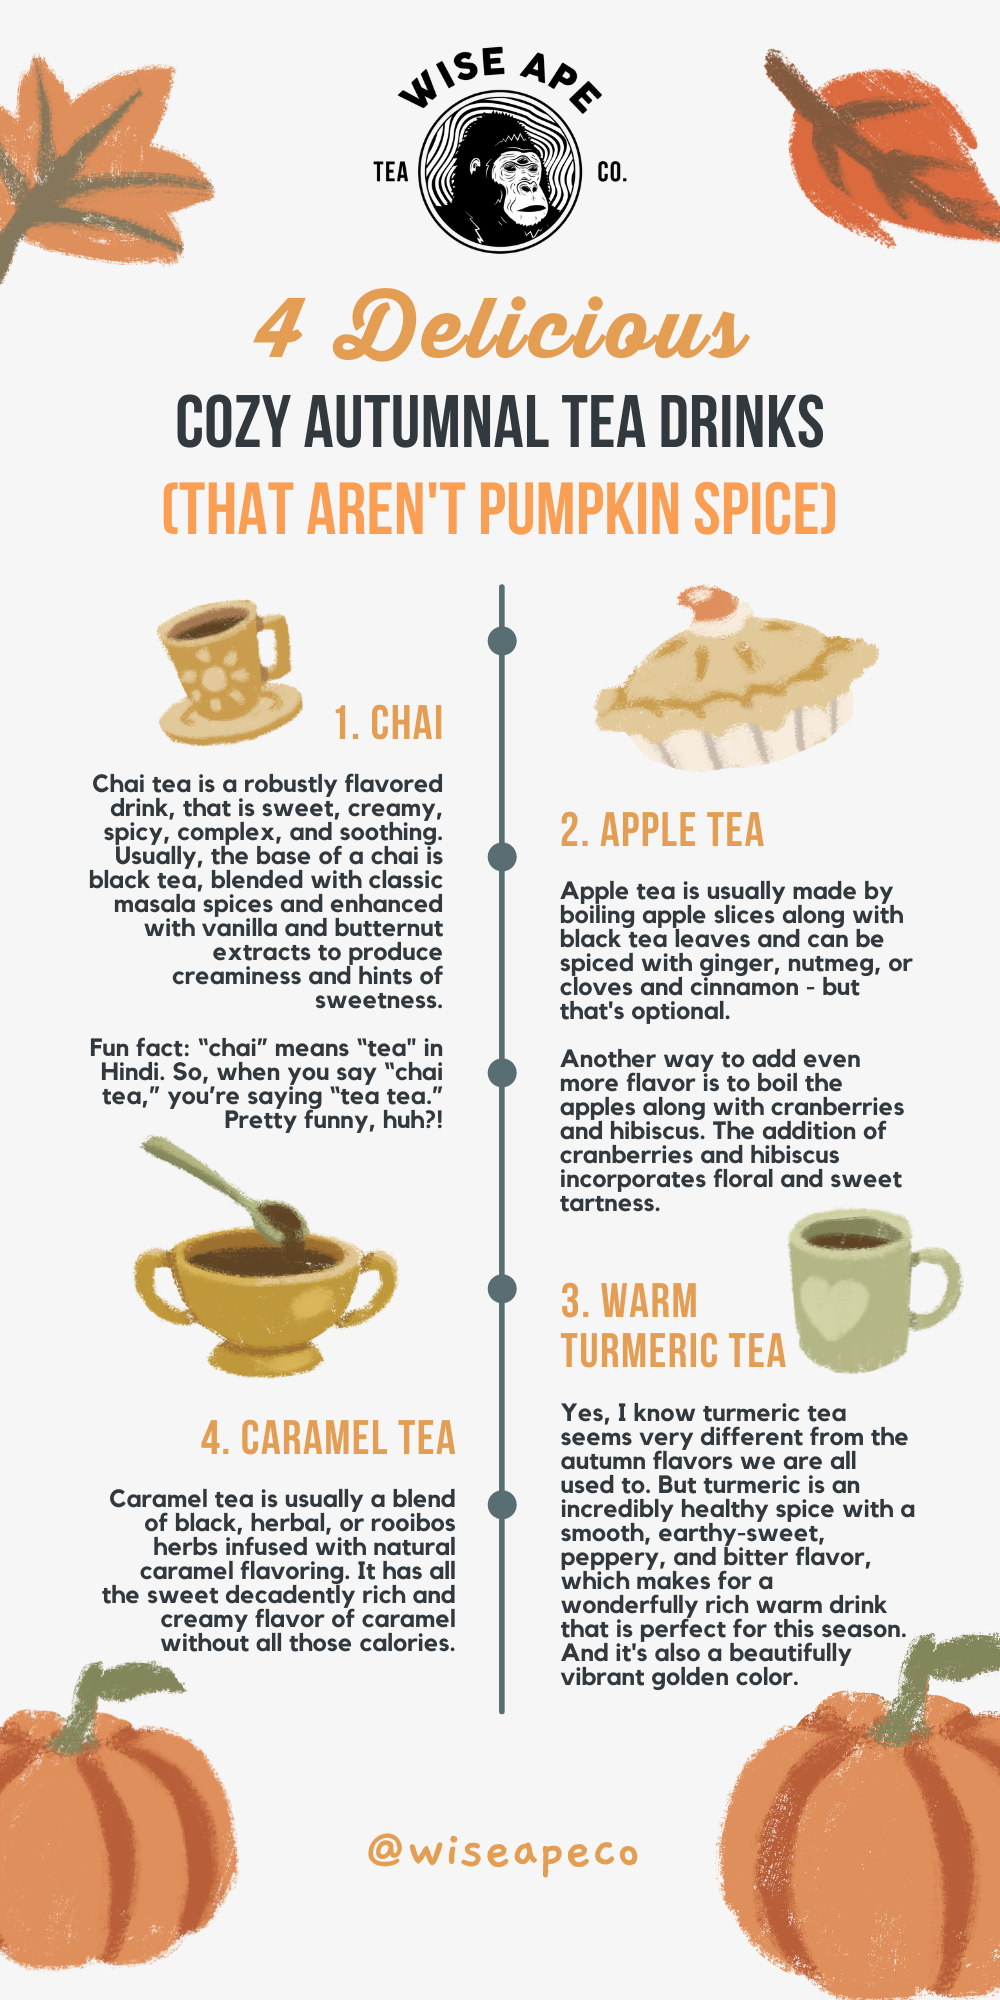 4 Delicious Fall Tea Drinks You Need To Try This Season (That Aren't Pumpkin Spice)